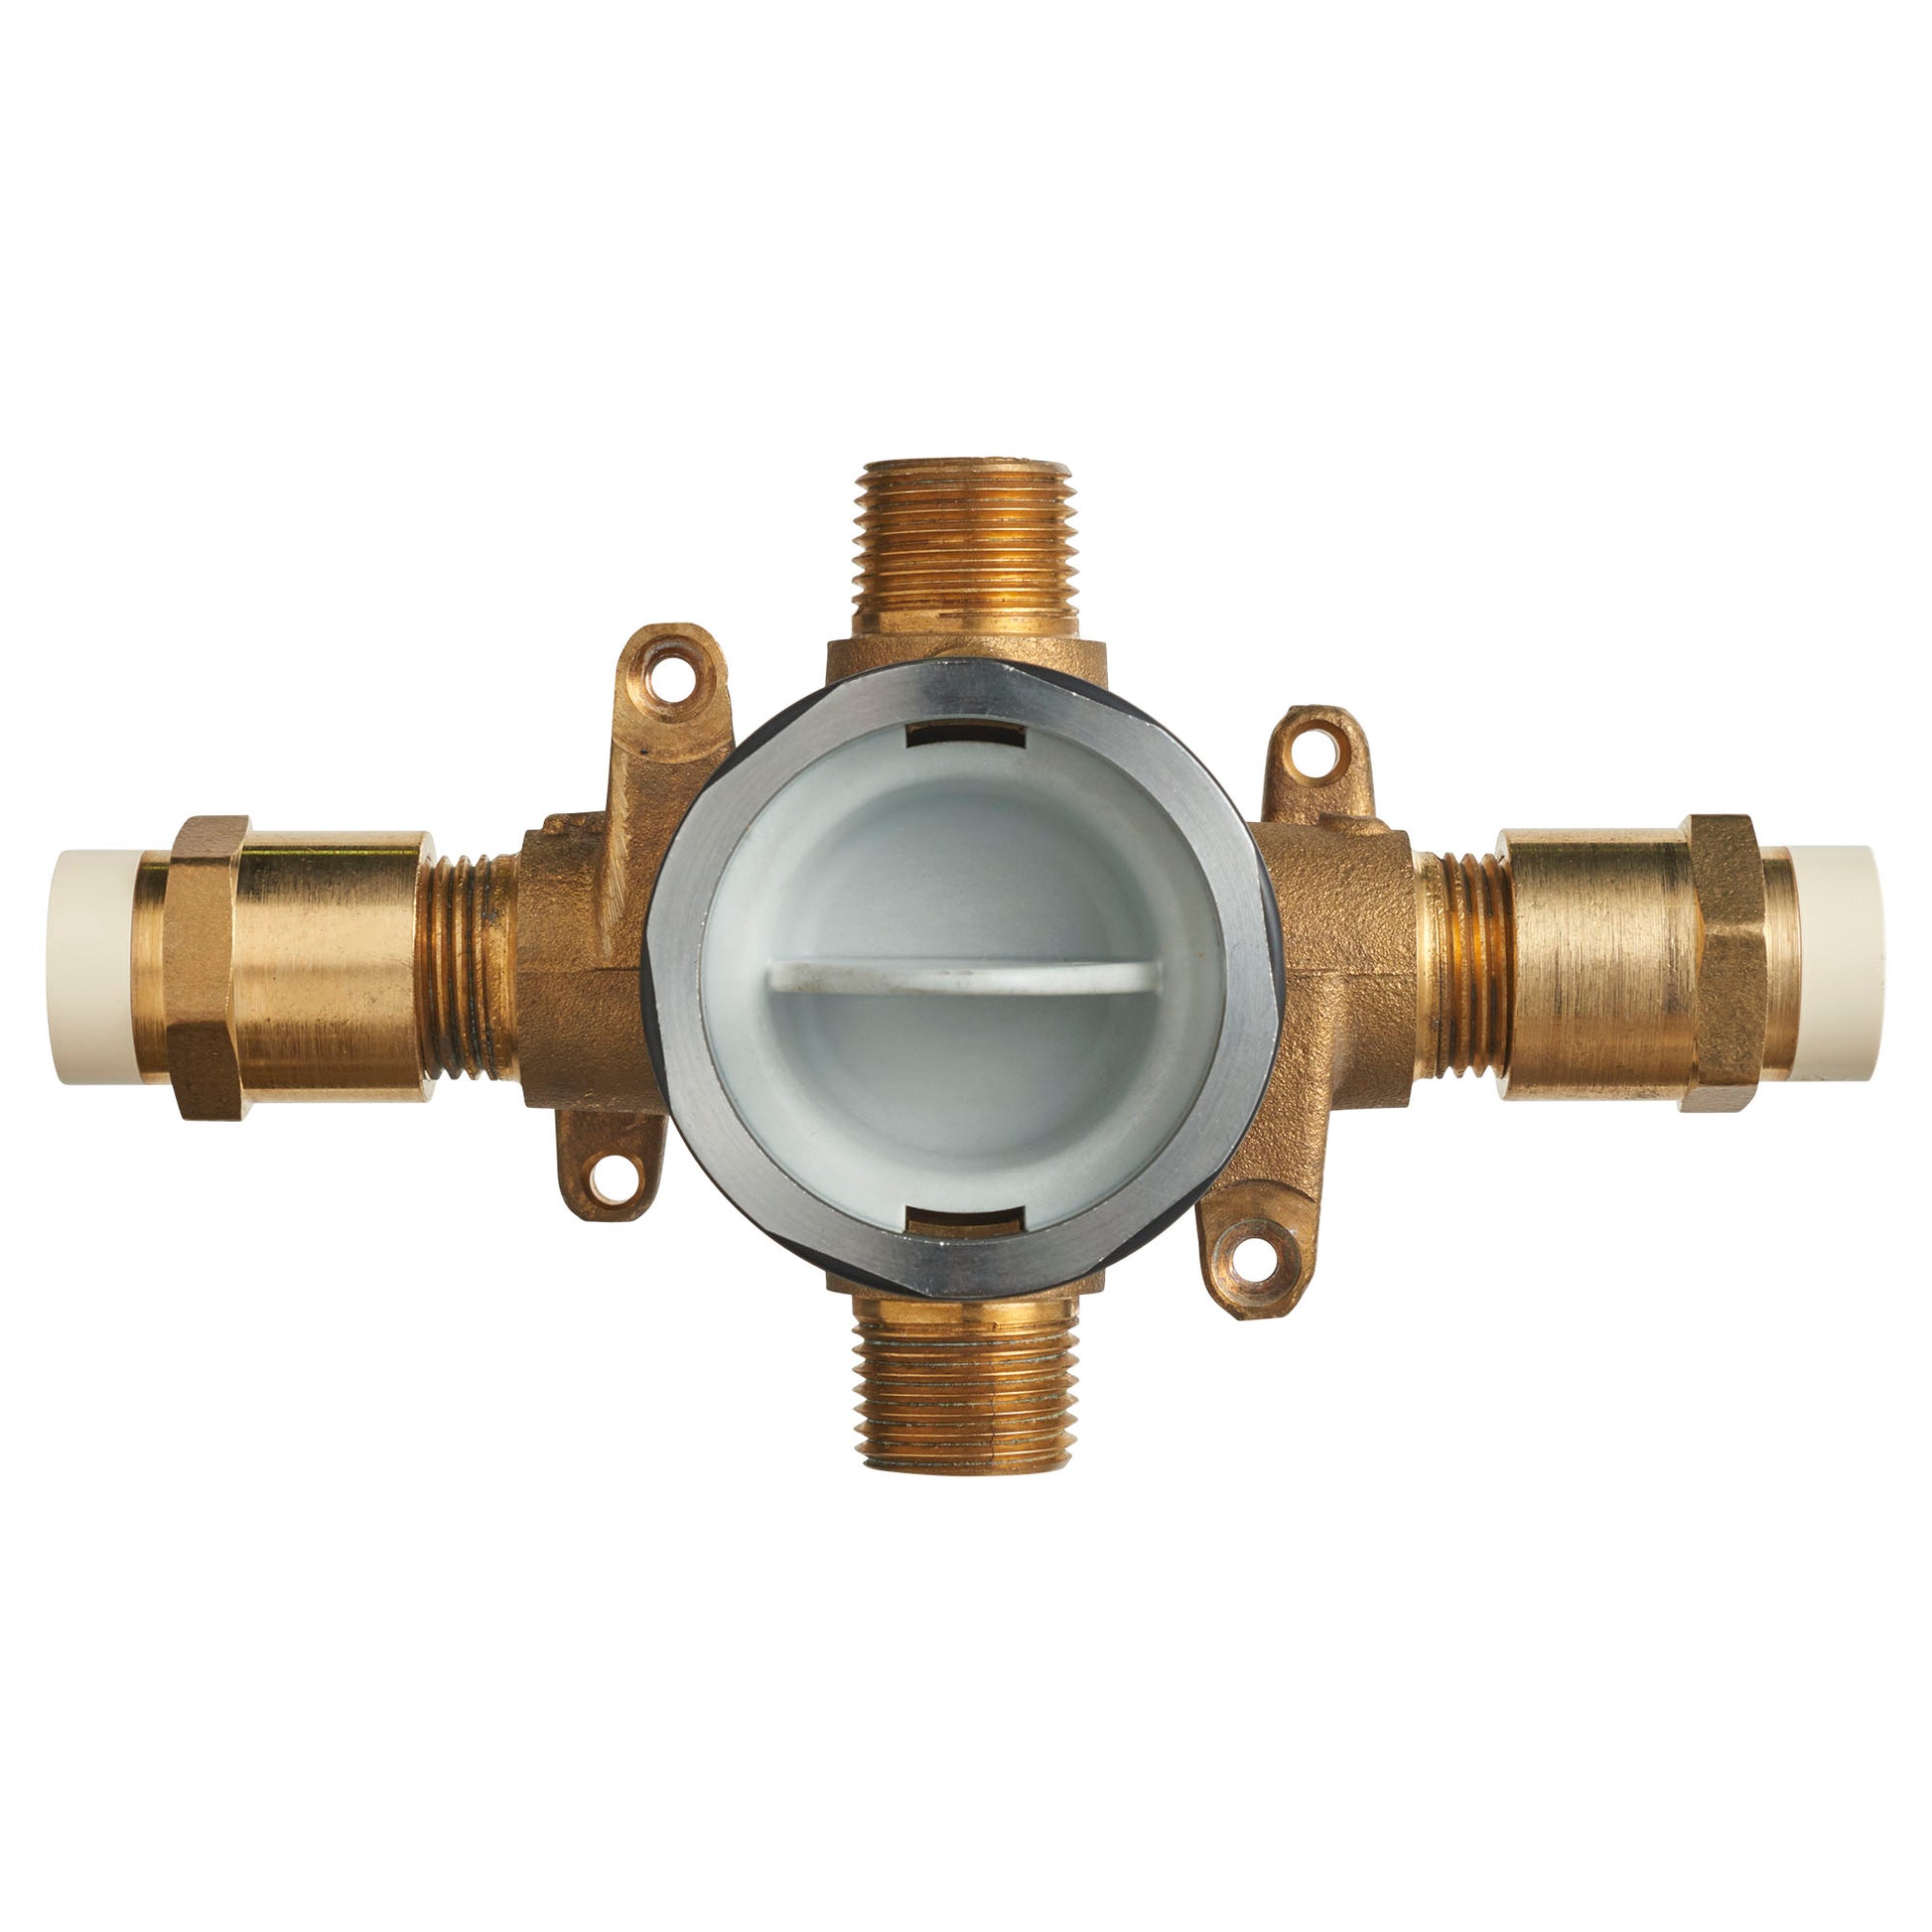 AMERICAN-STANDARD RU109, Flash Shower Rough-In Valve With CPVC Inlets/Universal Outlets